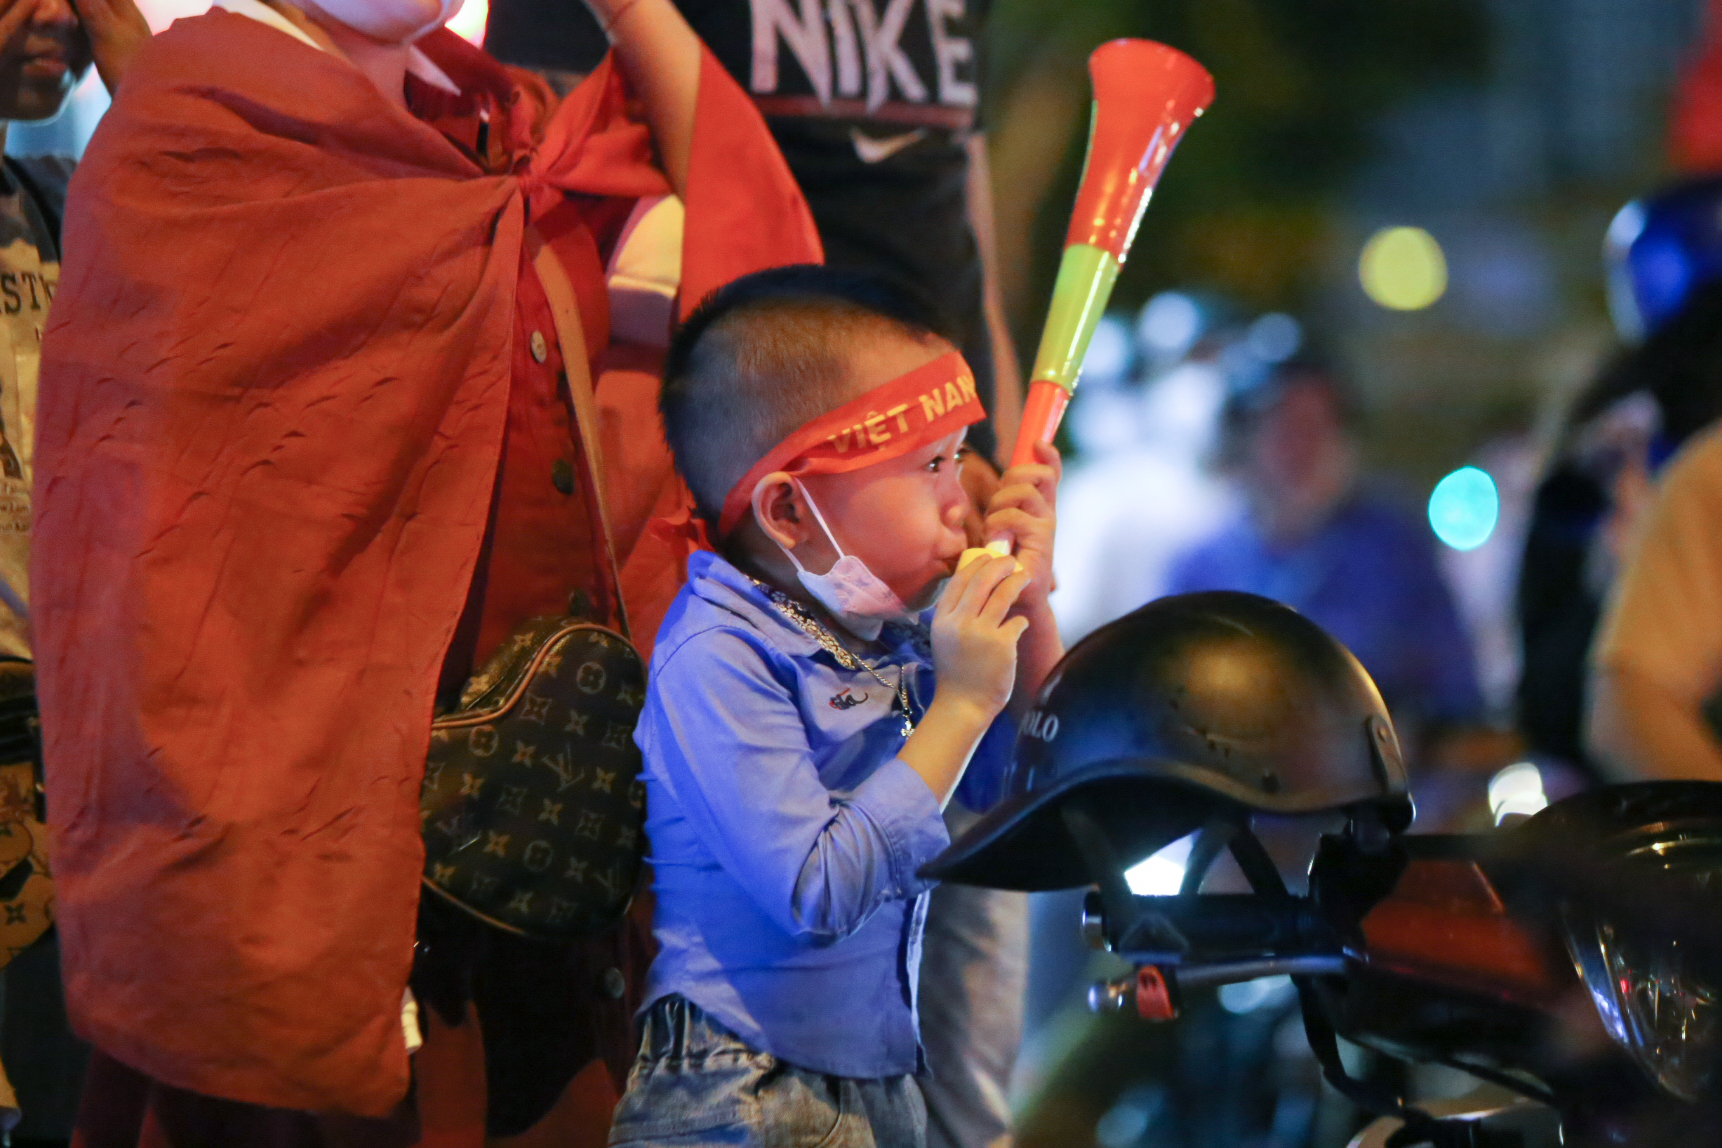 A boy blasts an air horn to celebrate Vietnam's gold medal in men's football at the 31st SEA Games on Ham Nghi Street in District 1, Ho Chi Minh City. Photo: Nguyen Khang / Tuoi Tre